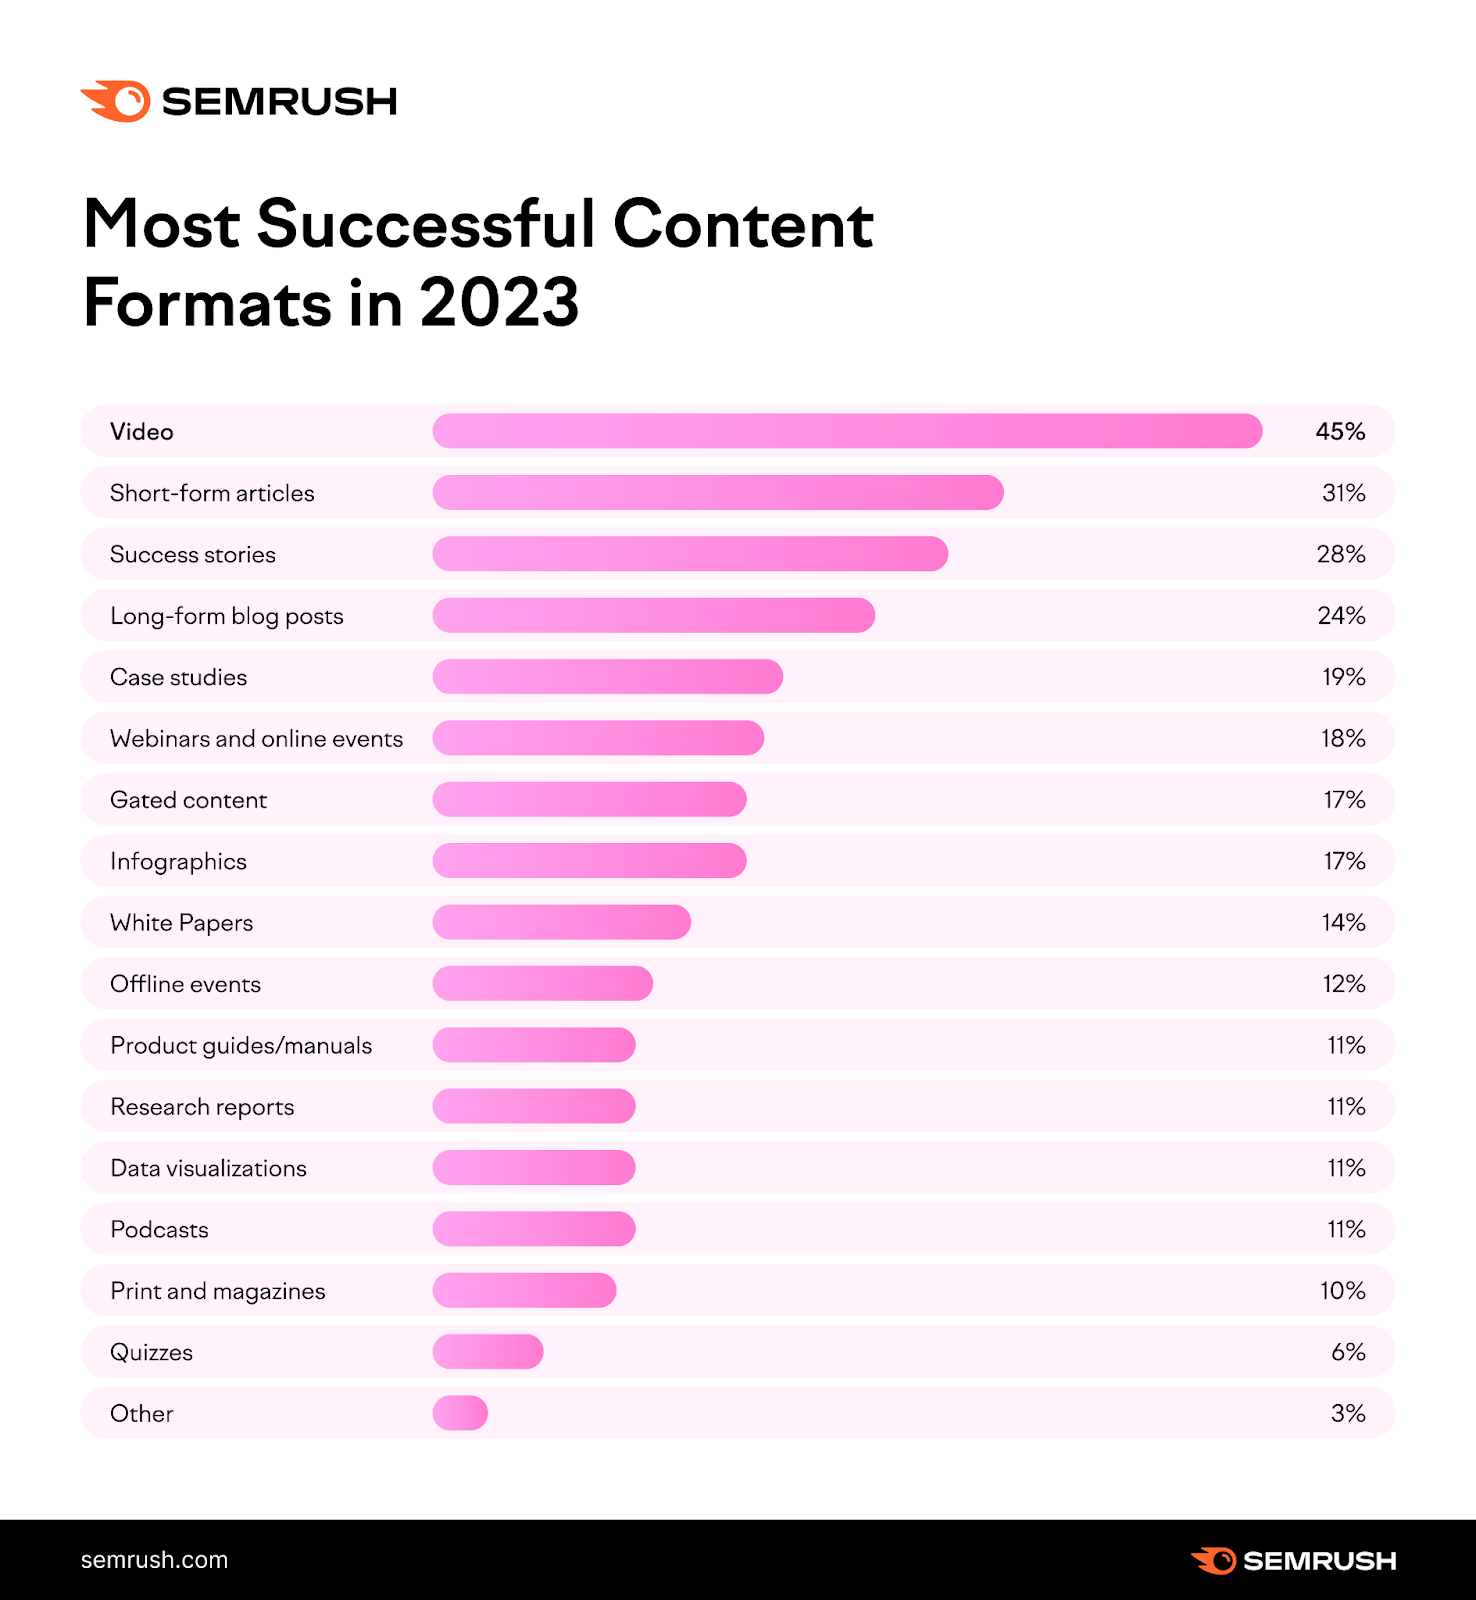 most successful content formats in 2023 include video (45%), short-form articles (31%), success stories (28%), long-form blog posts (24%), and others